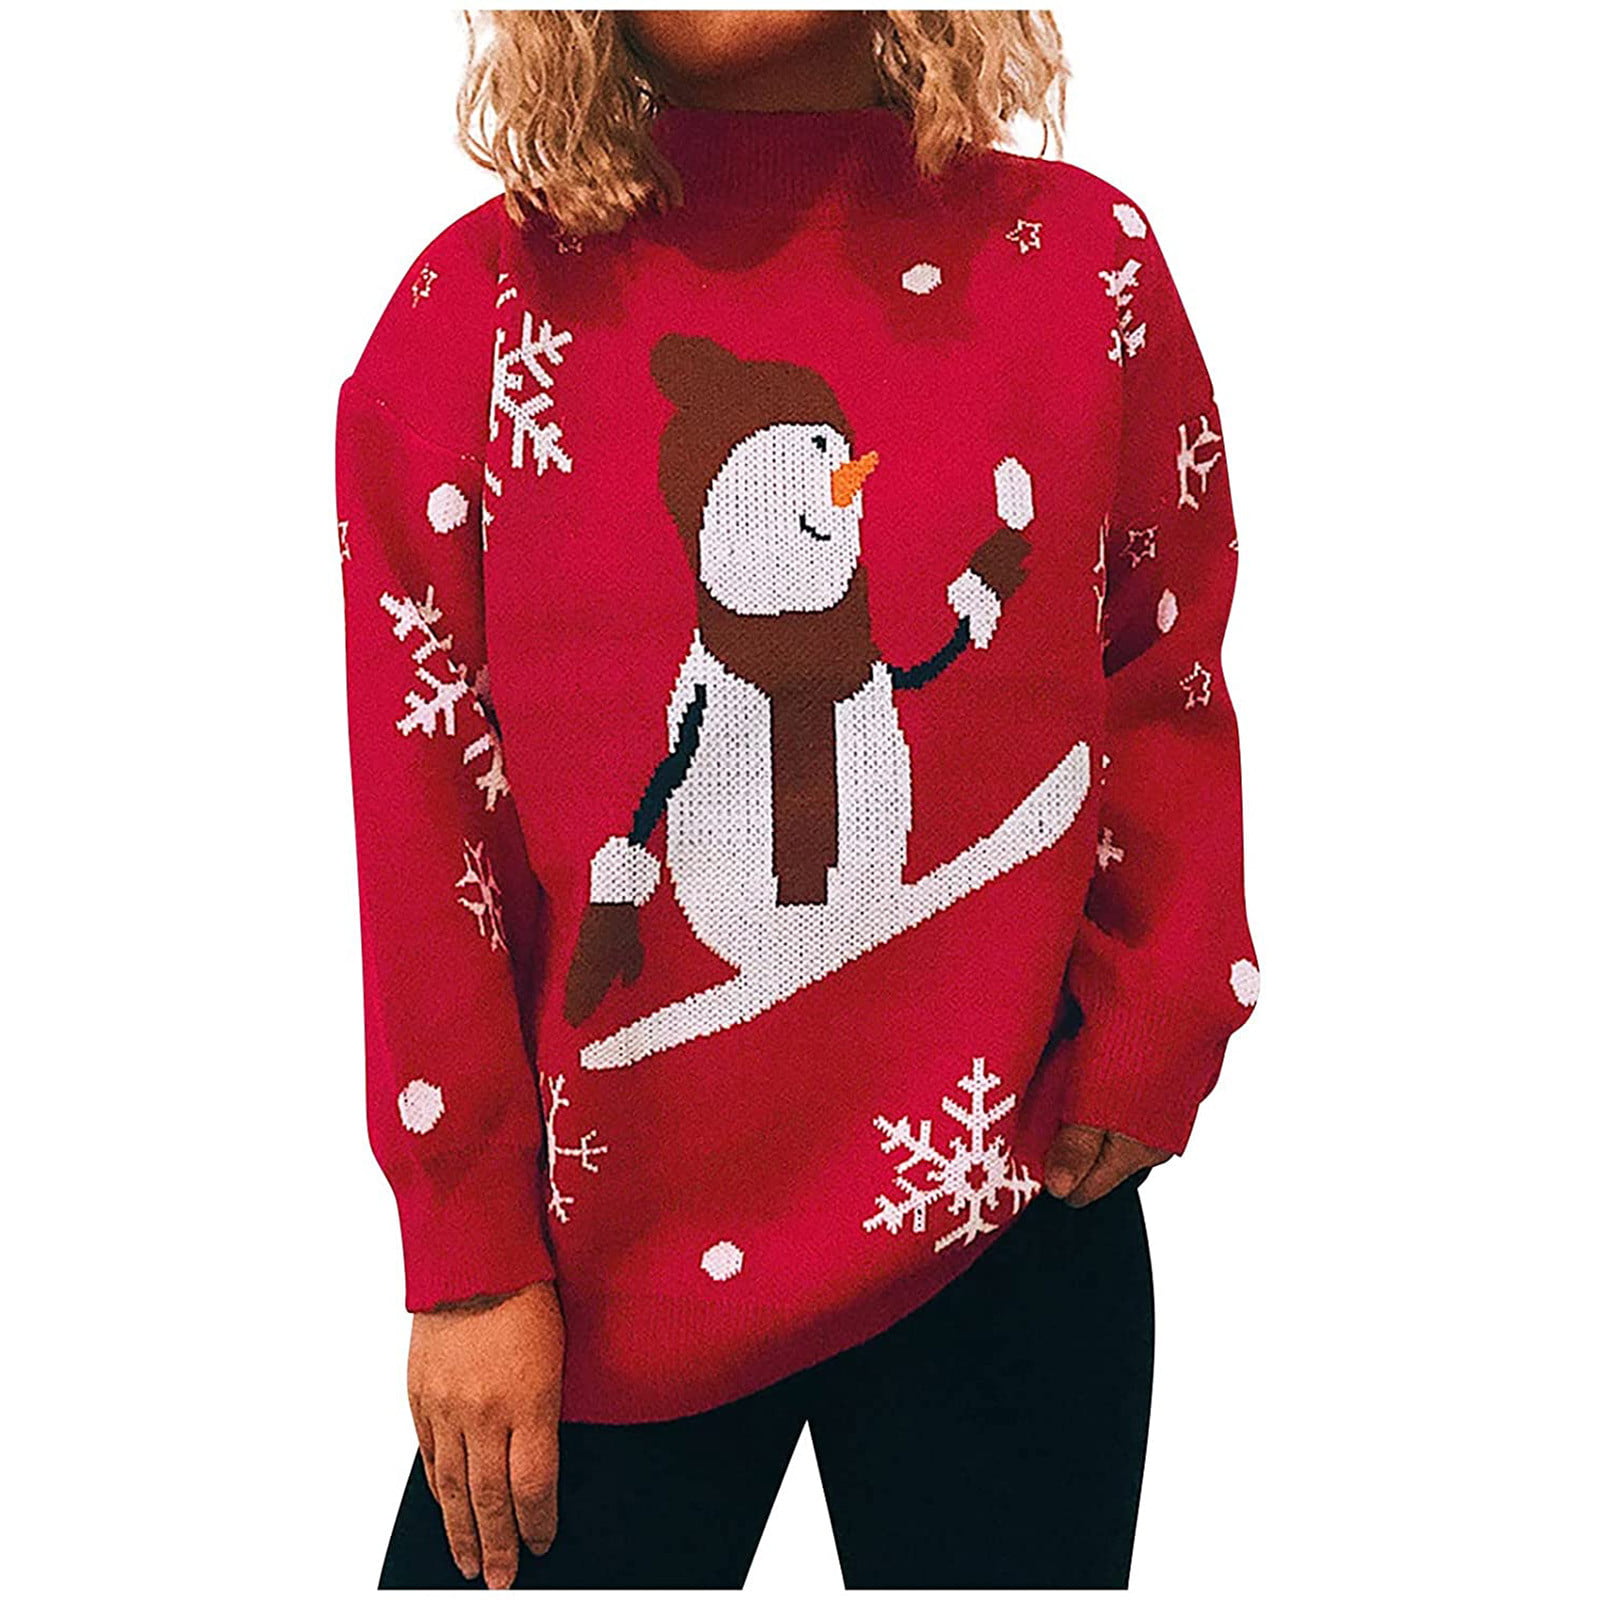 Sweaters for Women Autumn Winter Women's Christmas Printing Splicing Round Neck Long Sleeve Line Sweater Tops Blouse Sueter para Invierno - Walmart.com